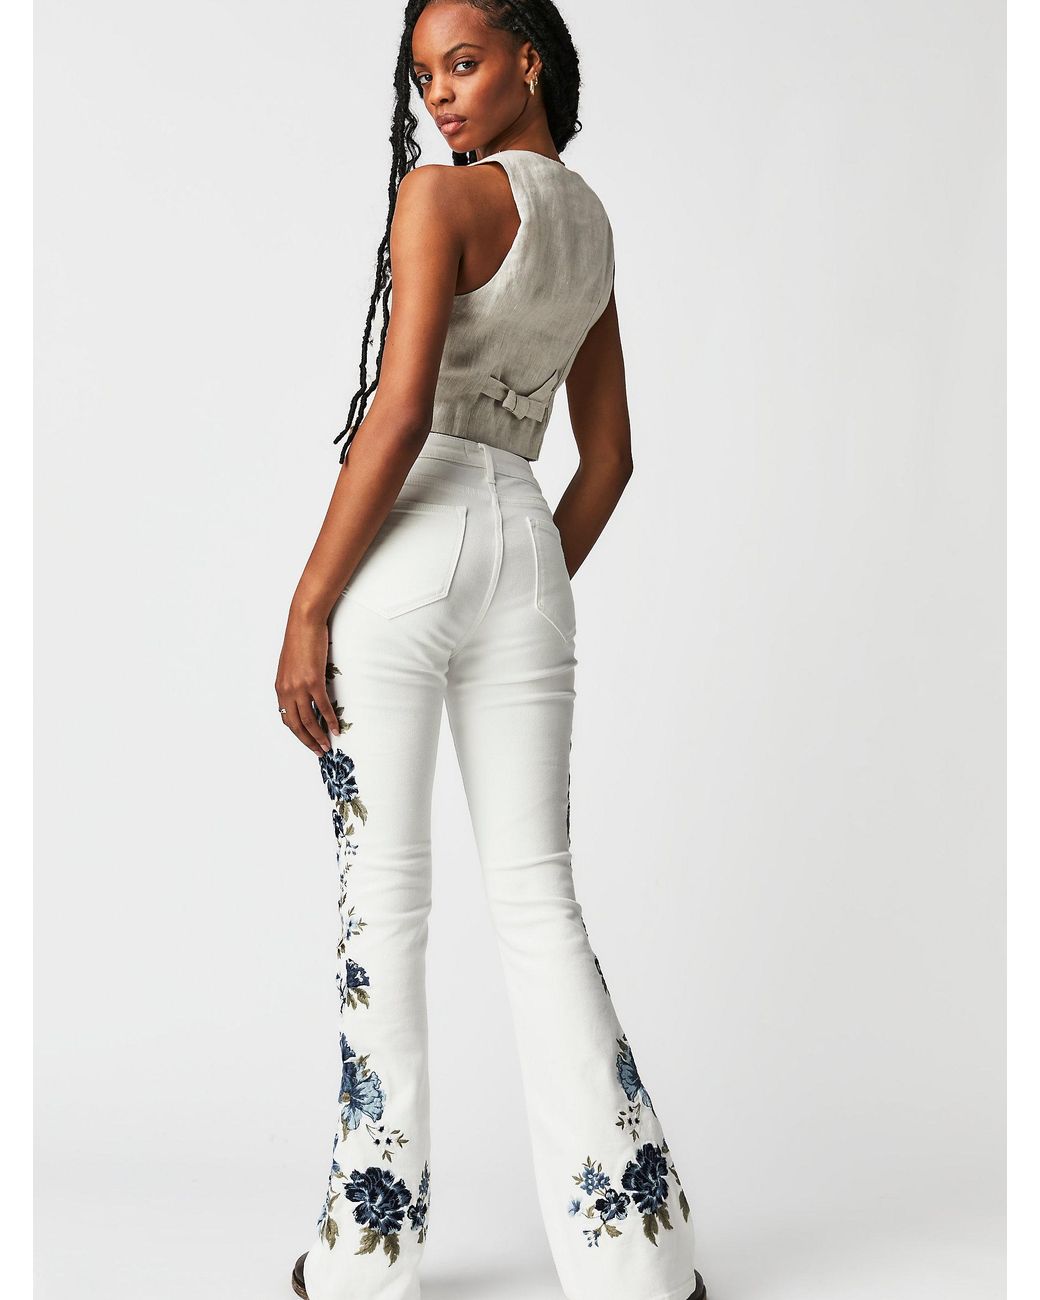 Free People Driftwood Farrah Embroidered Flare Jeans in White | Lyst